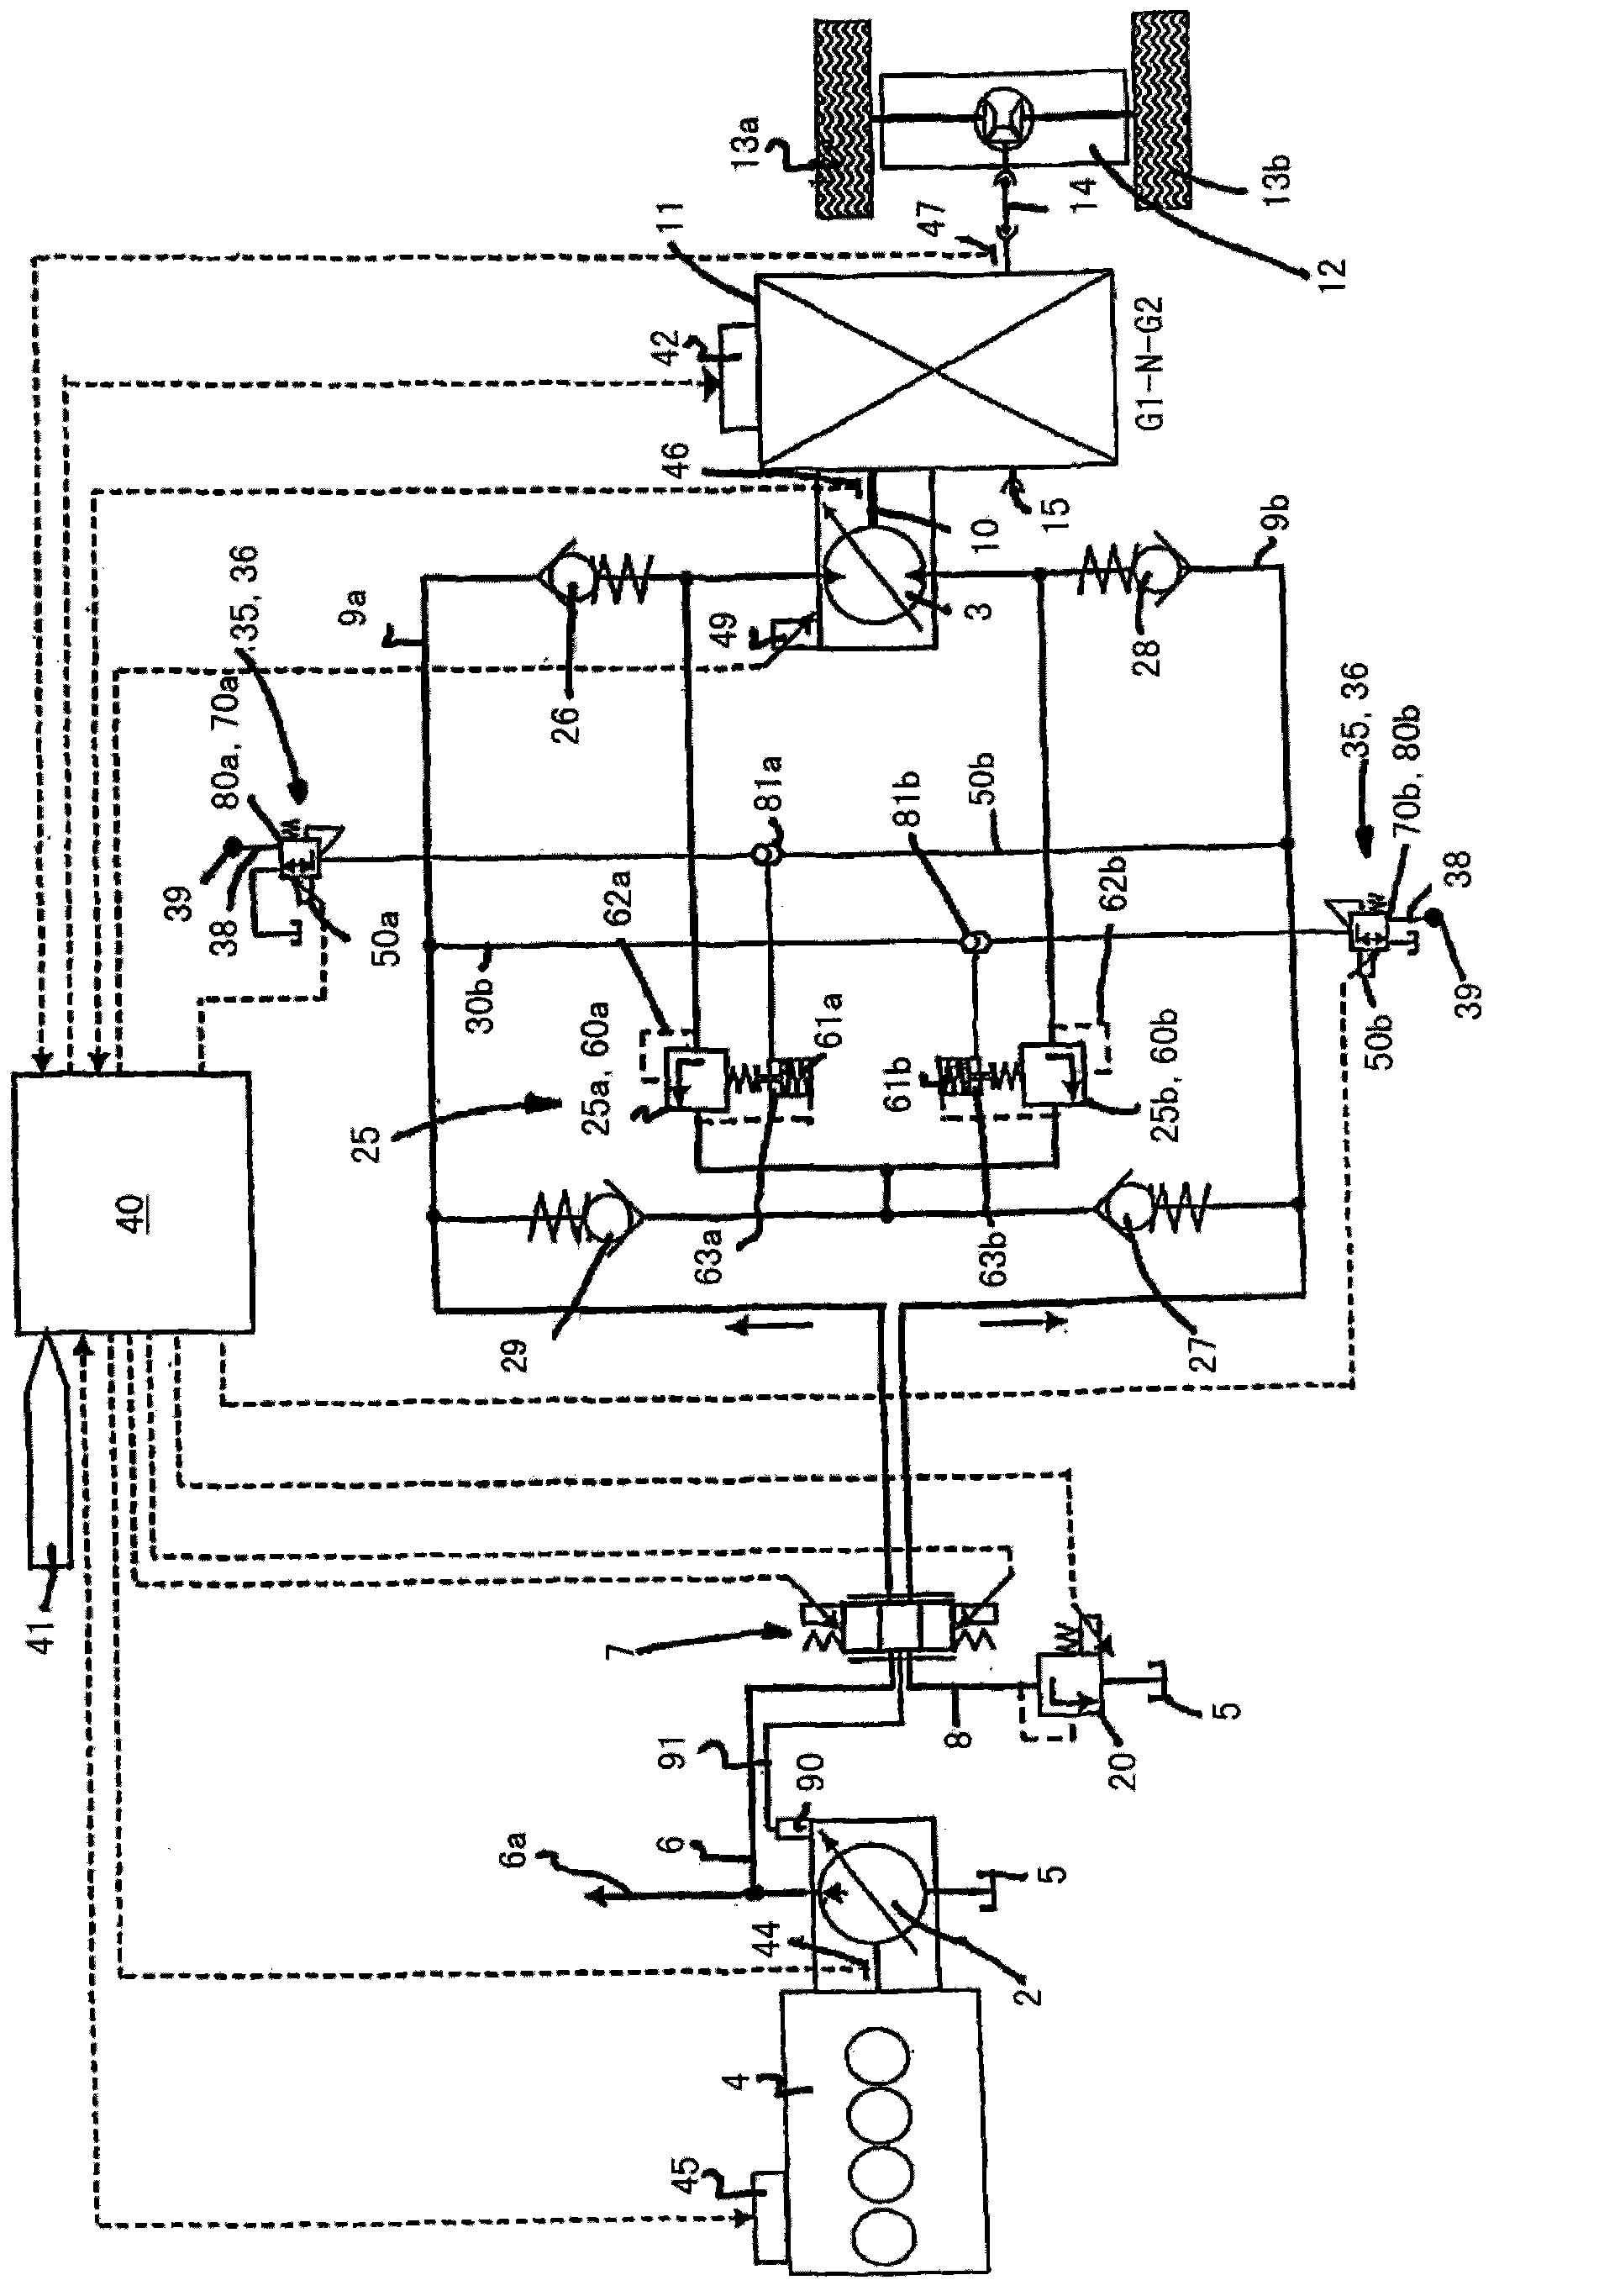 Method for shifting gears of transmission device gear-shifting transmission capable of being switched between at least two transmission levels